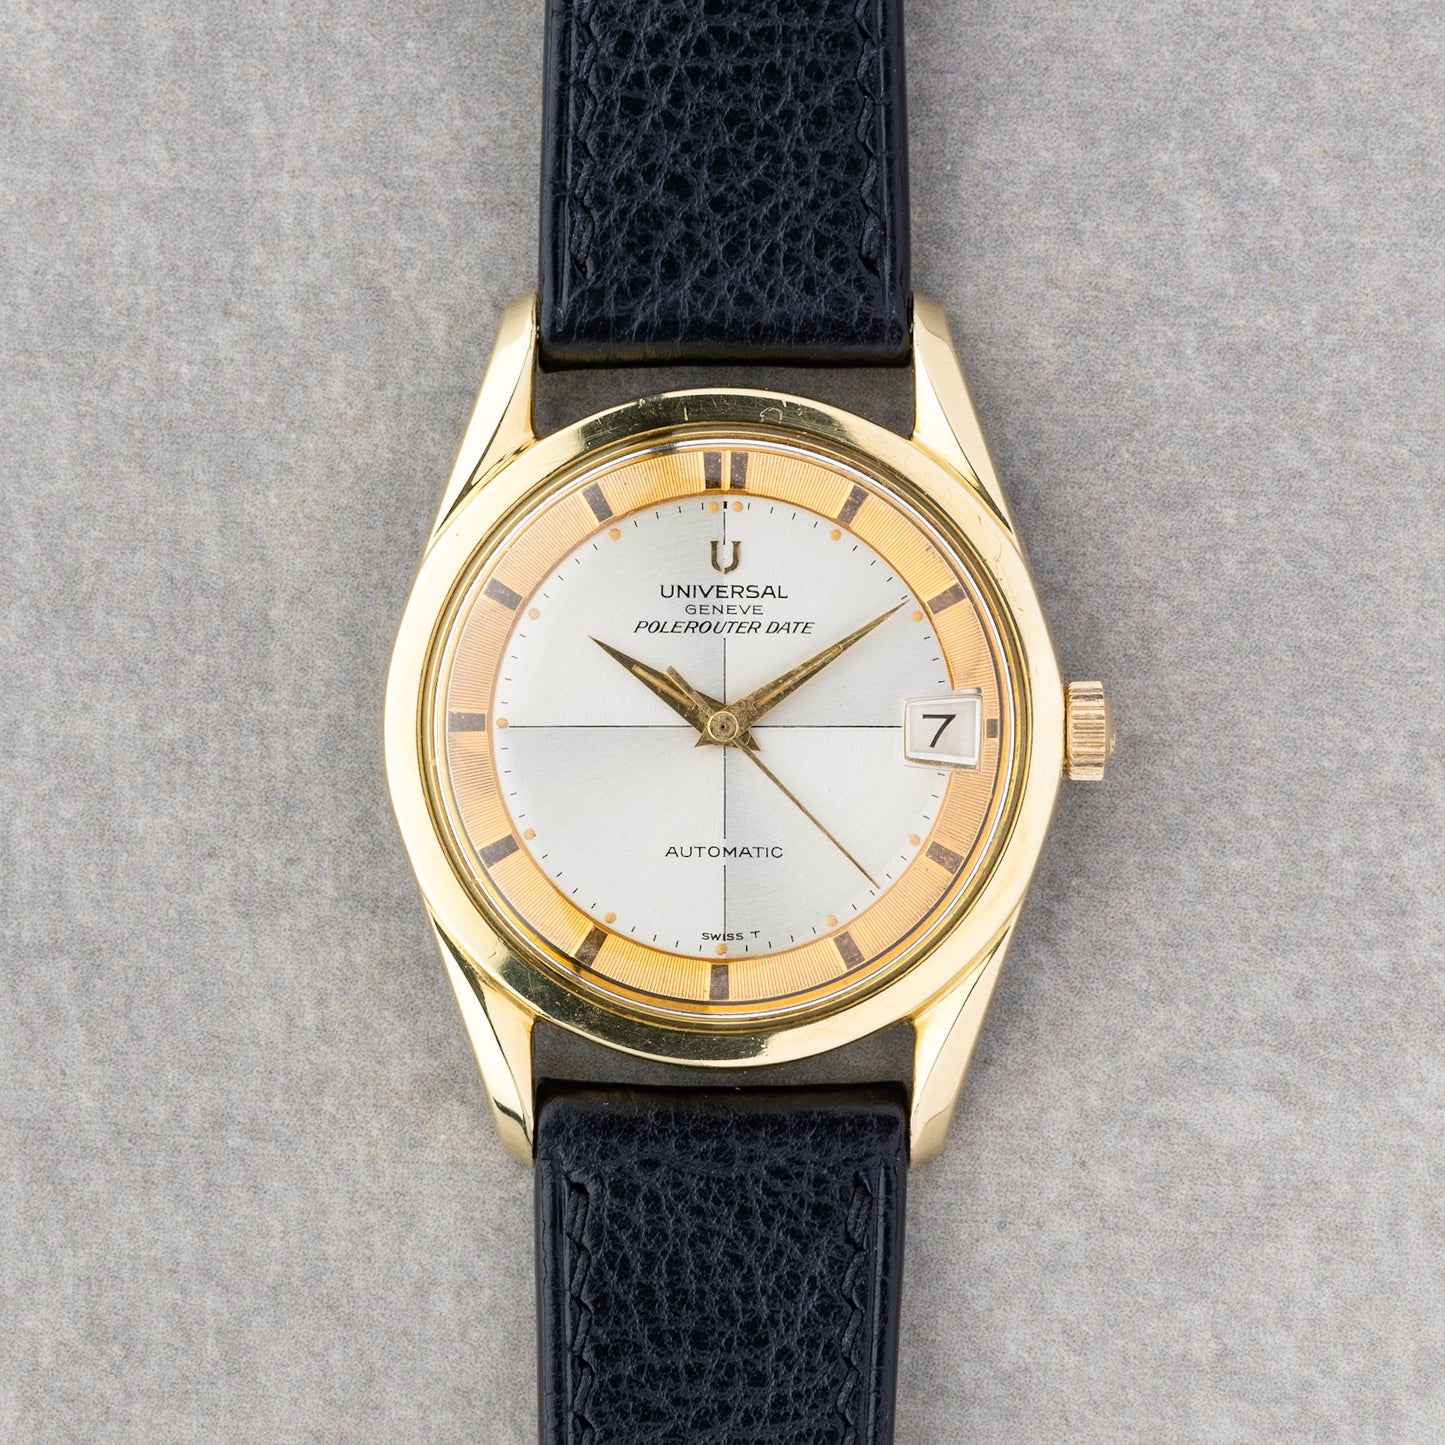 1965 Universal Genève Polerouter Date Automatic Microtor Ref. 869102/11